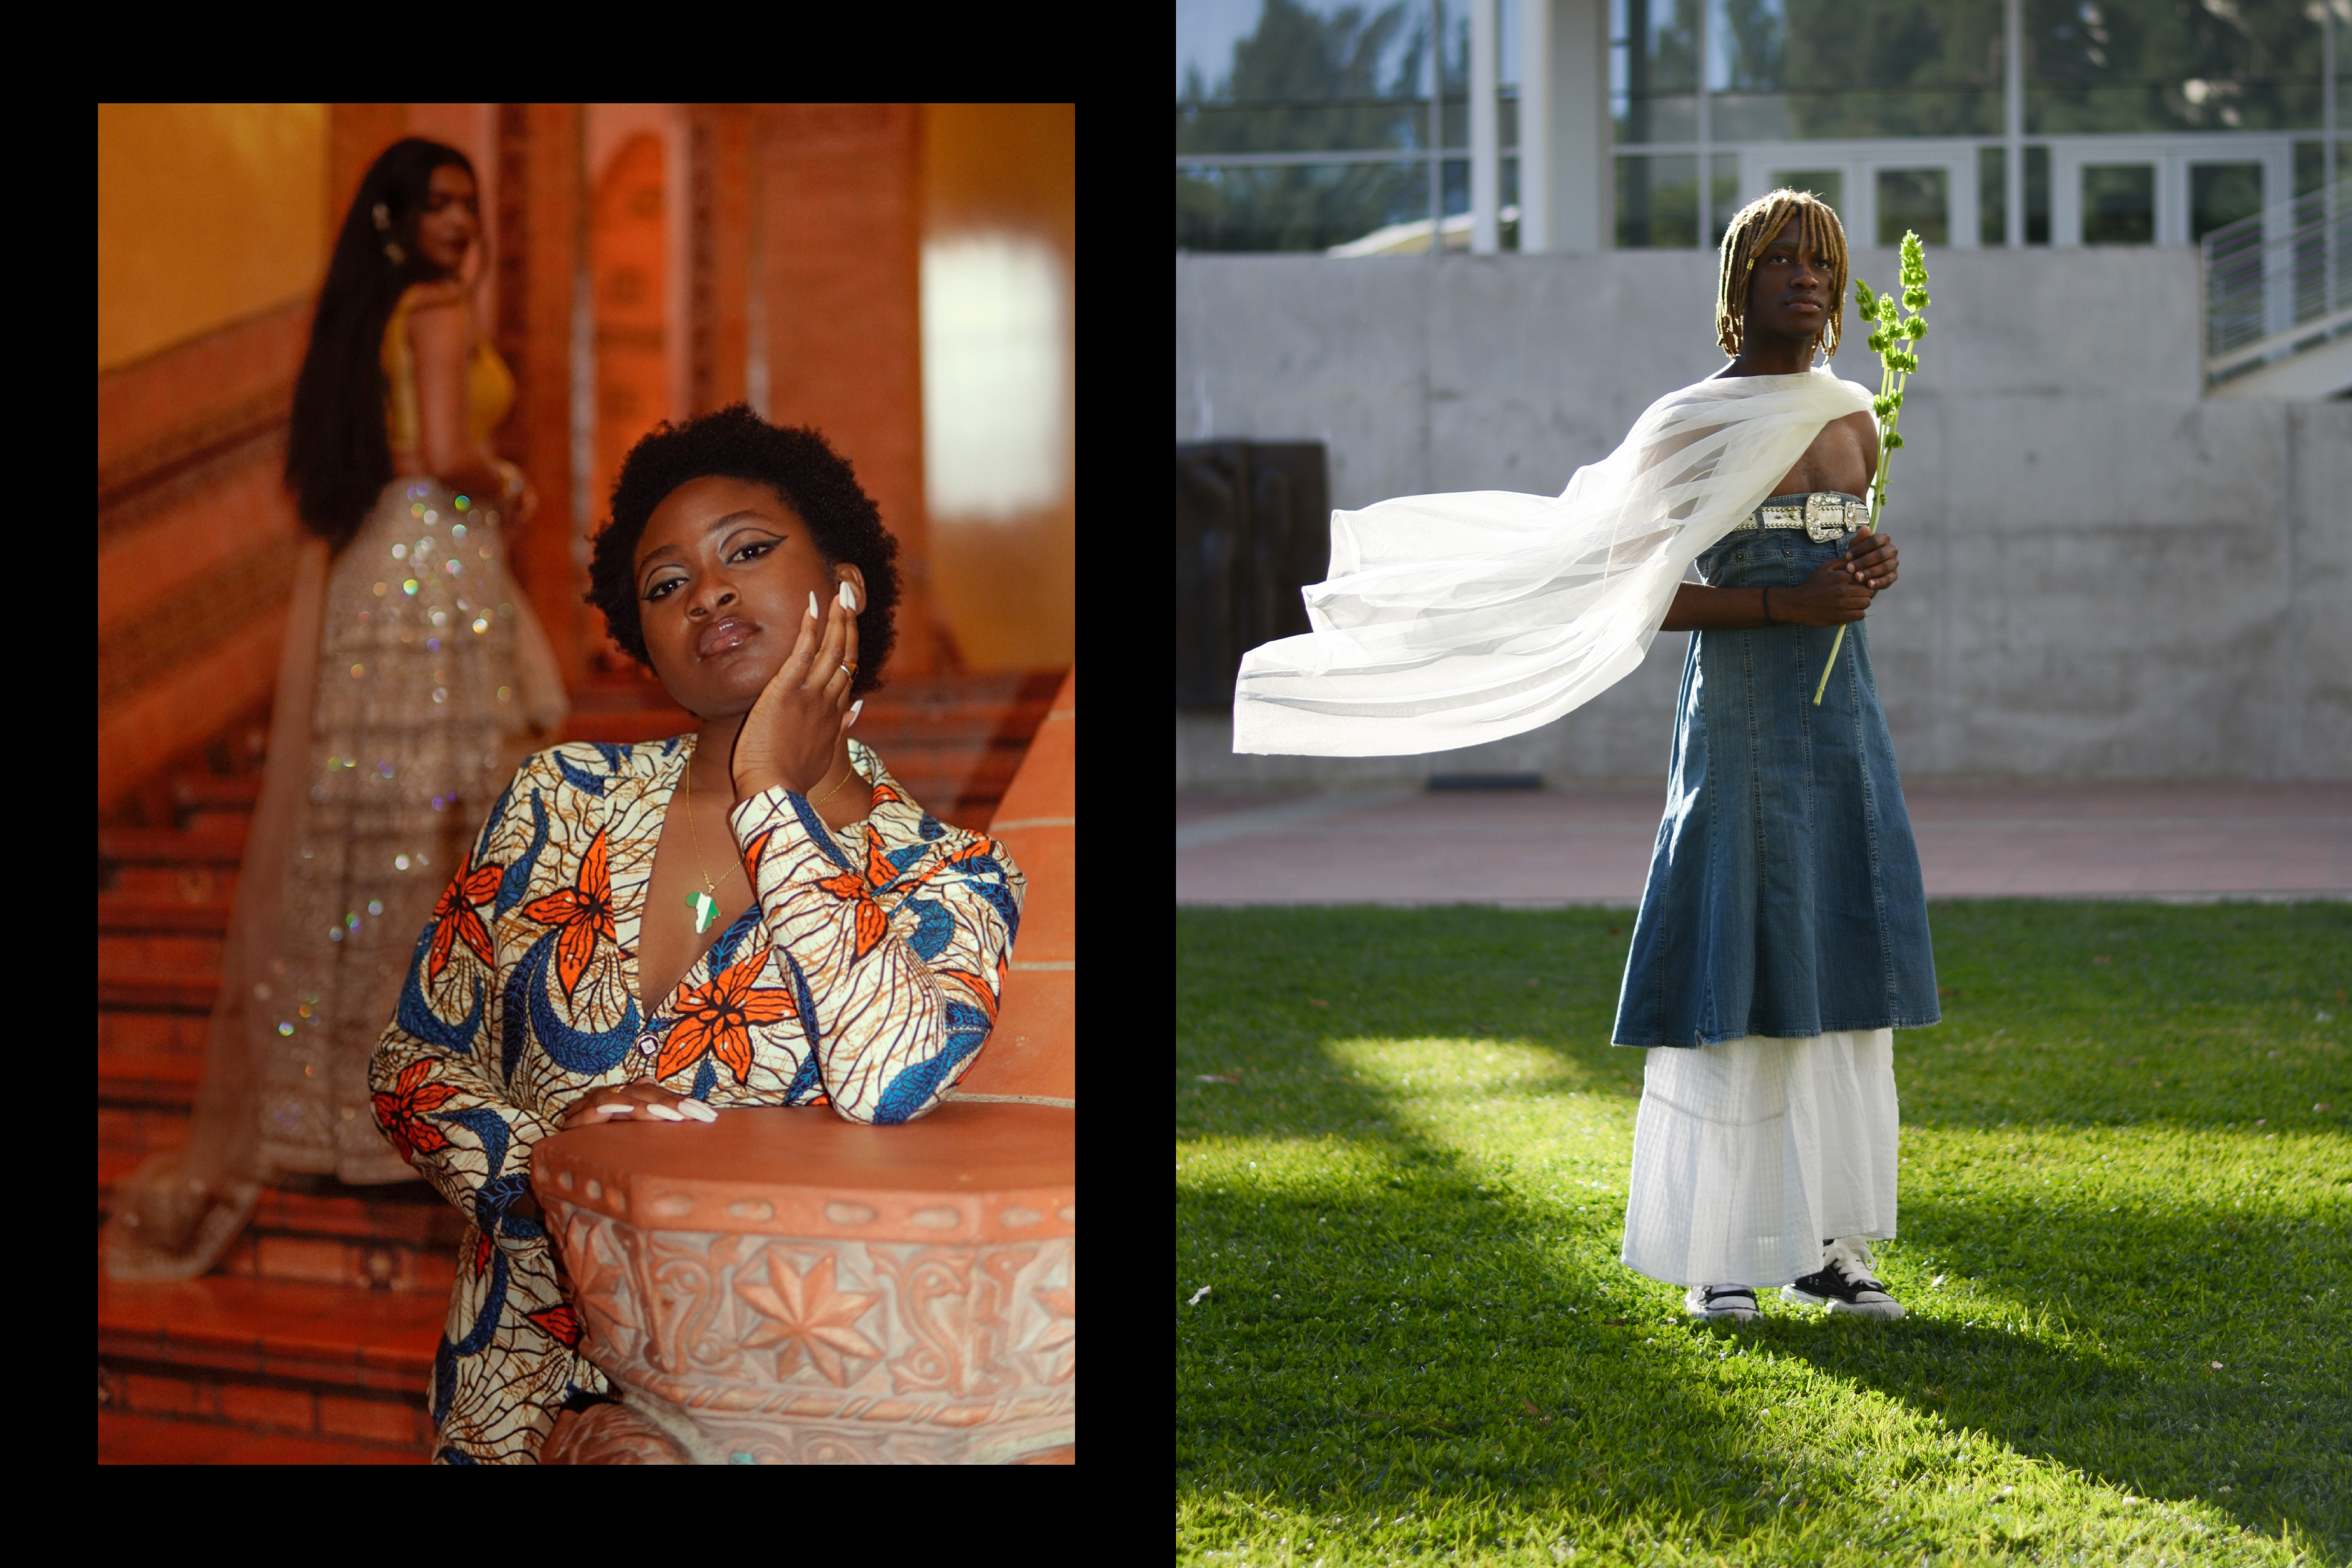 2 photo collage. Photo on left: 2 young women pose in colorful dresses. Photo on left: a man wearing a flowy, lacey white cape, denim strapless dress covering his midriff to knees, a white lacey long skirt, holding a sprig of greenery, standing on a green lawn, looking at camera with a slight smile 